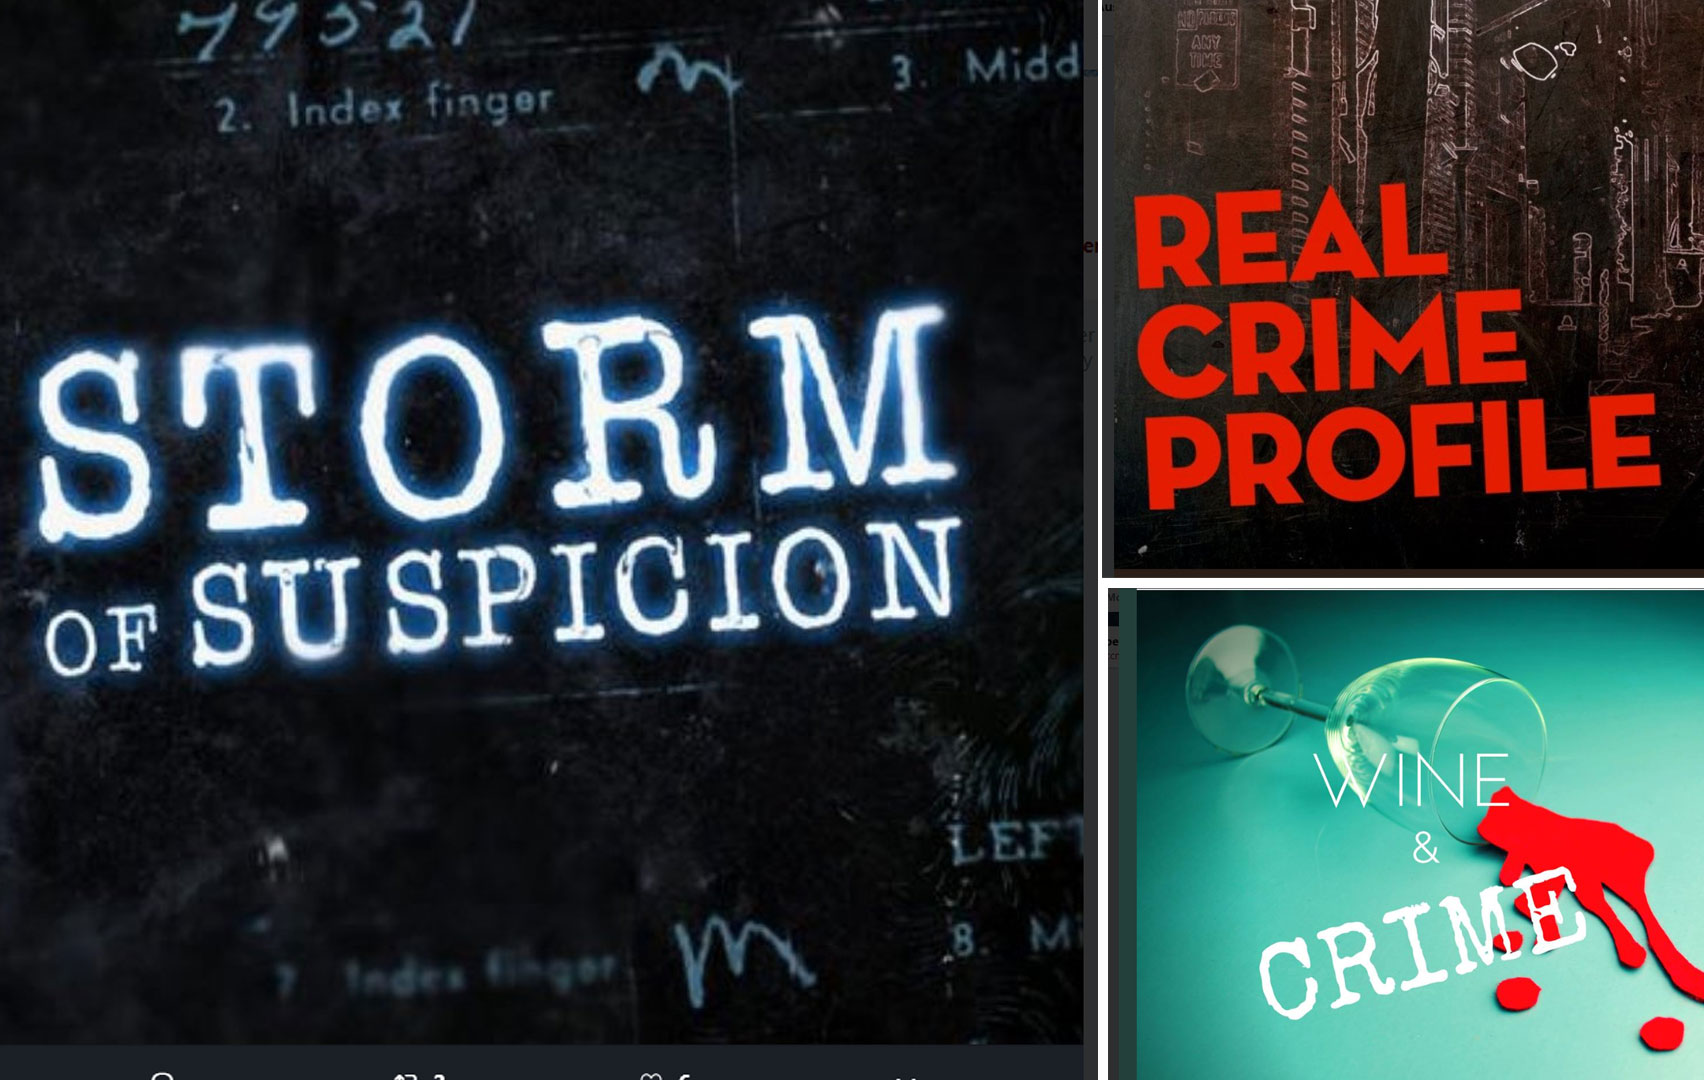 Dr. Austin’s Upcoming Appearances On The Weather Channel’s Storm Of Suspicion And Truecrime Podcasts Real Crime Profile And Wine & Crime!